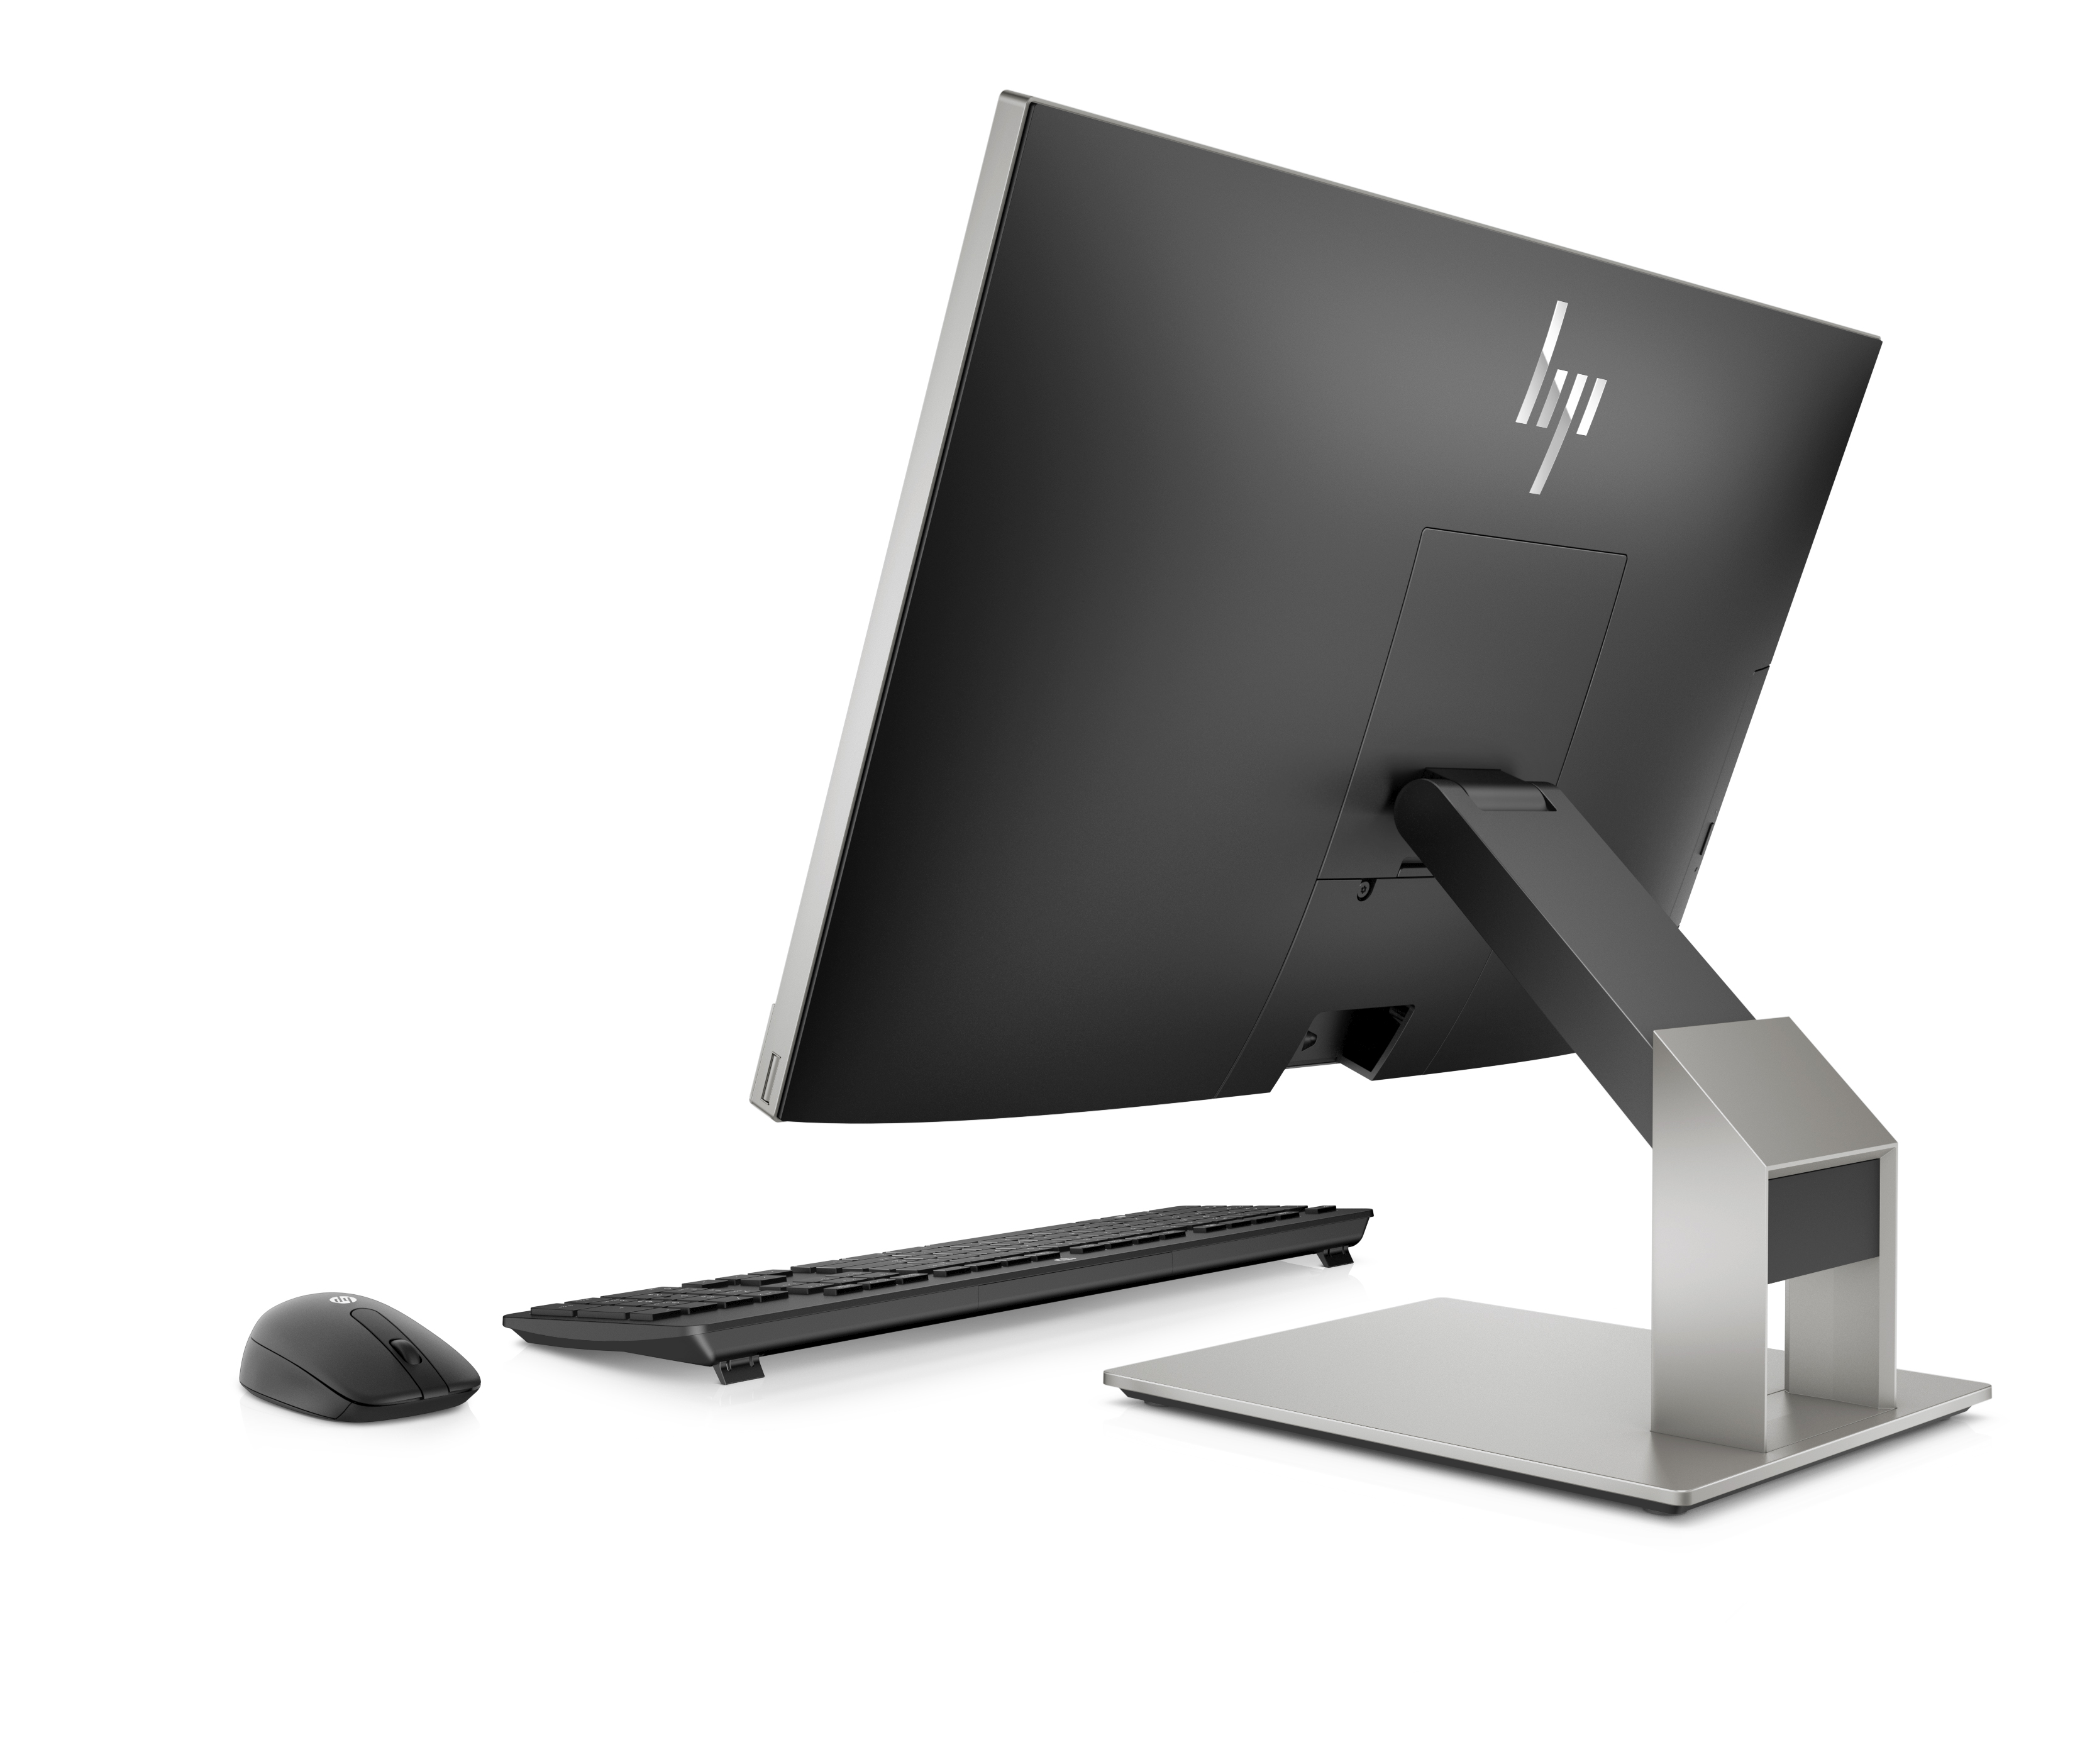 hp launches new monitors and all in one ces 2019 eliteone 800 g5 aio rear left